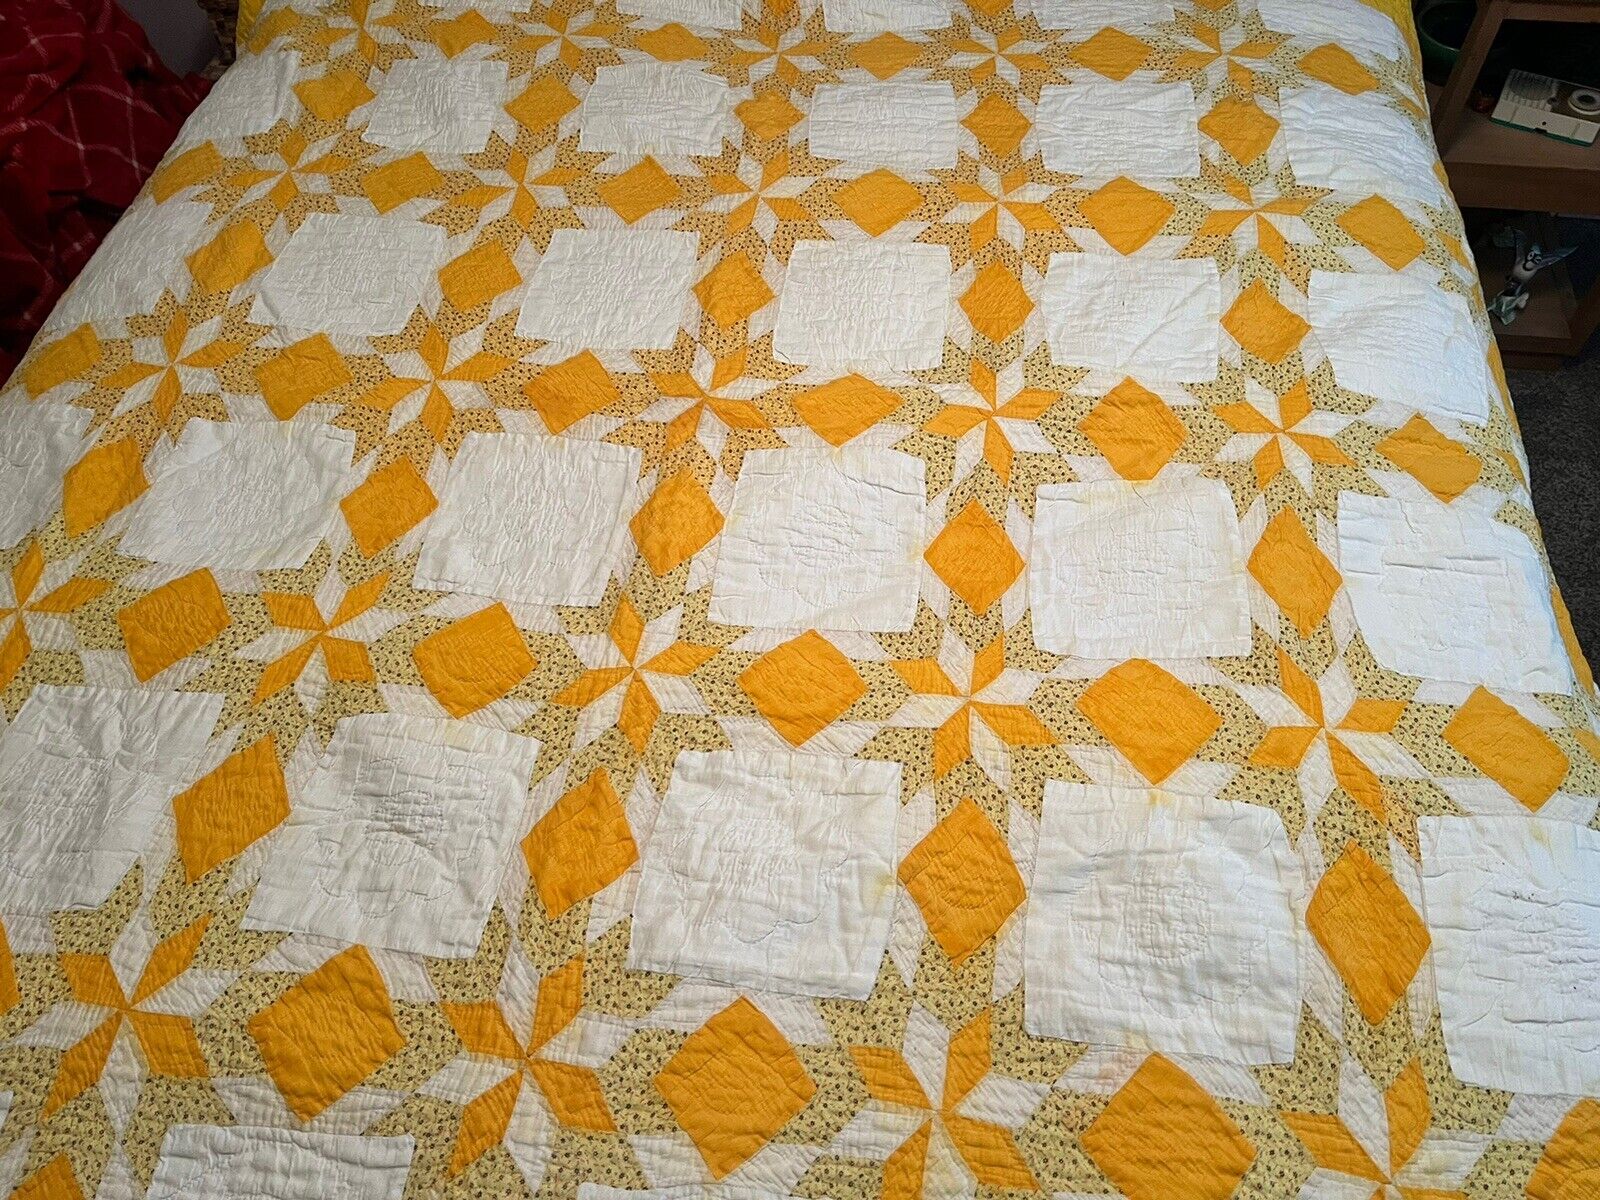 Vintage Yellow & White Hand Stitched Quilt 70x84